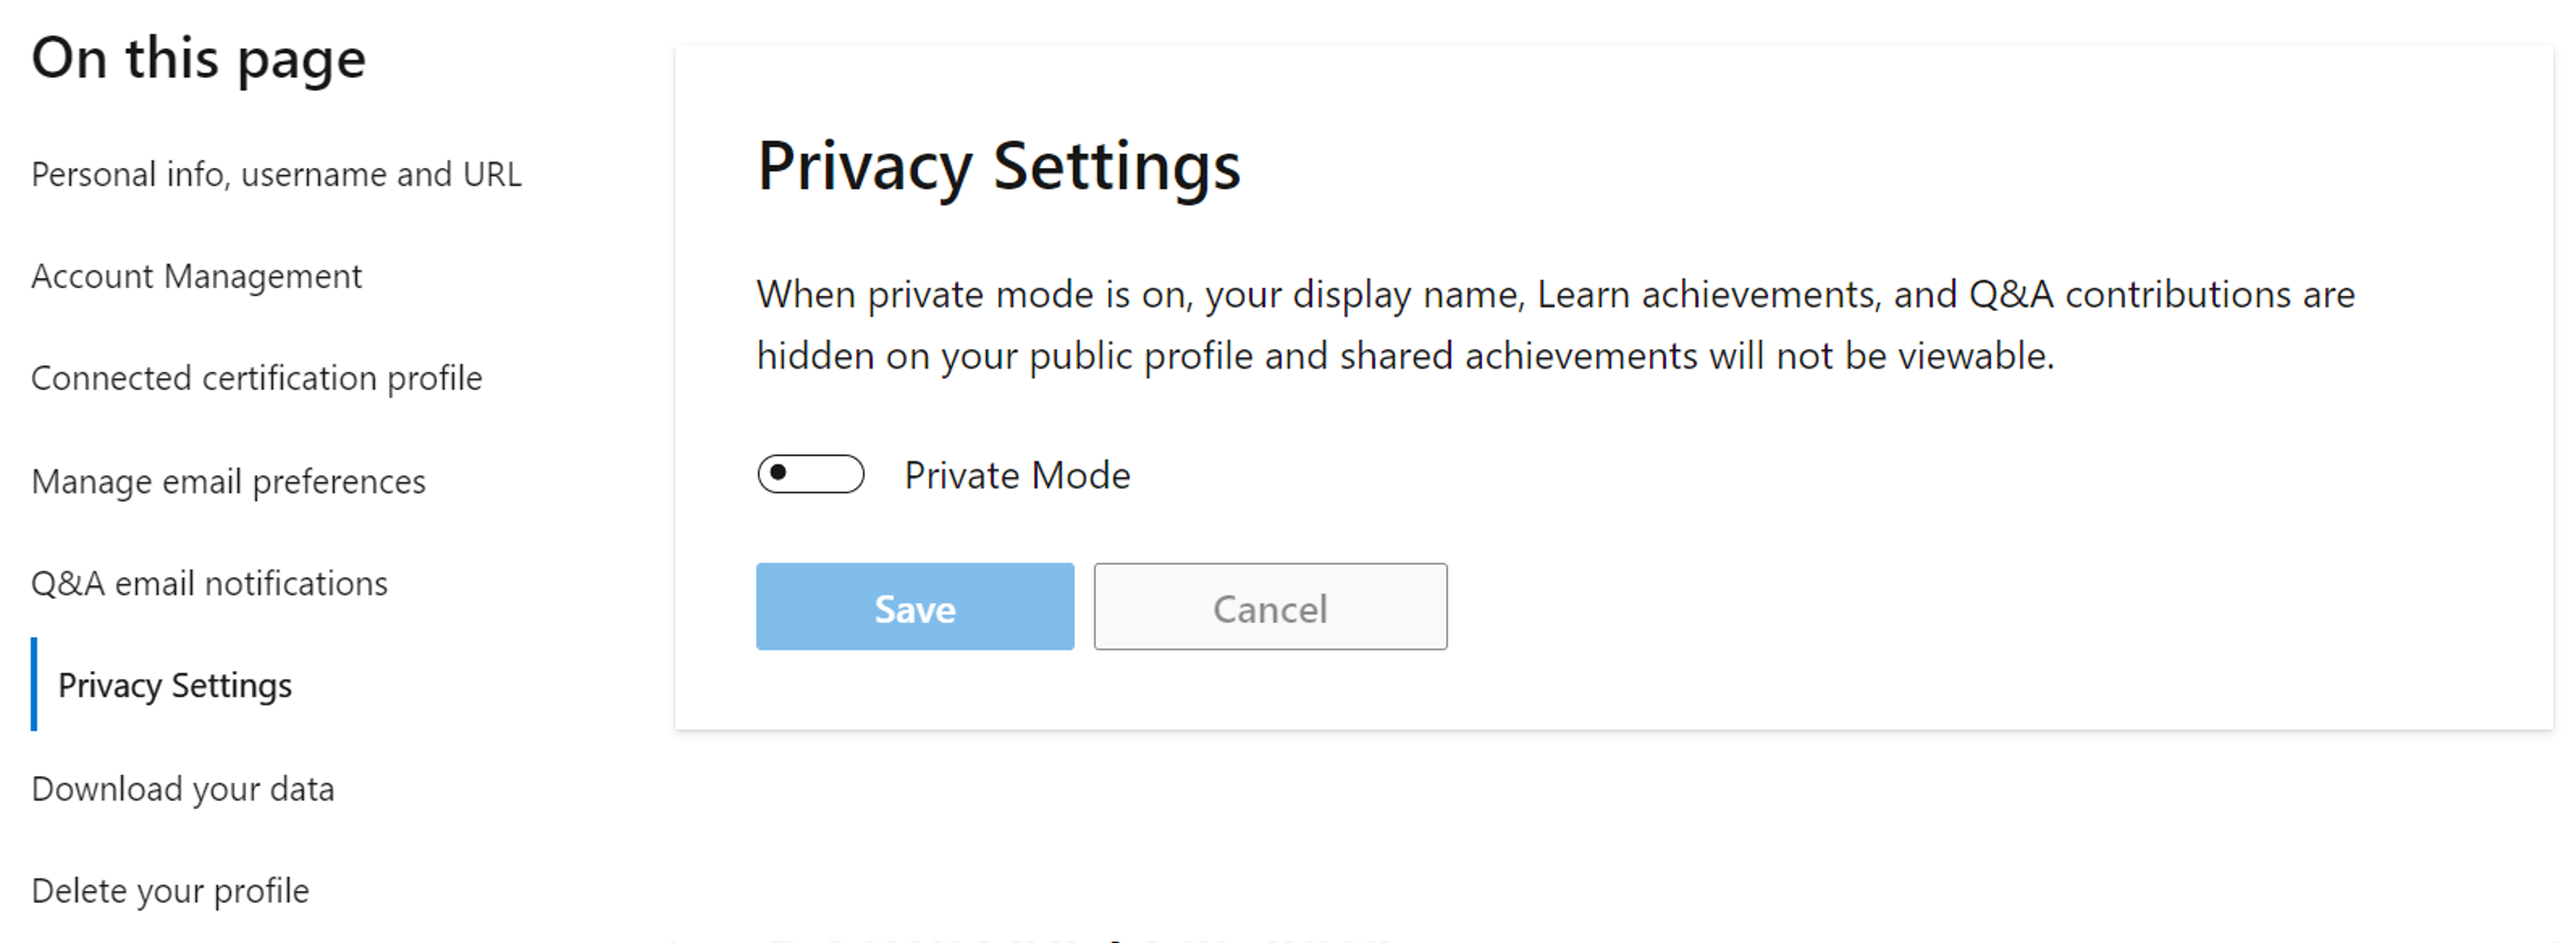 Screenshot of the Privacy settings section in the Microsoft Learn profile settings.